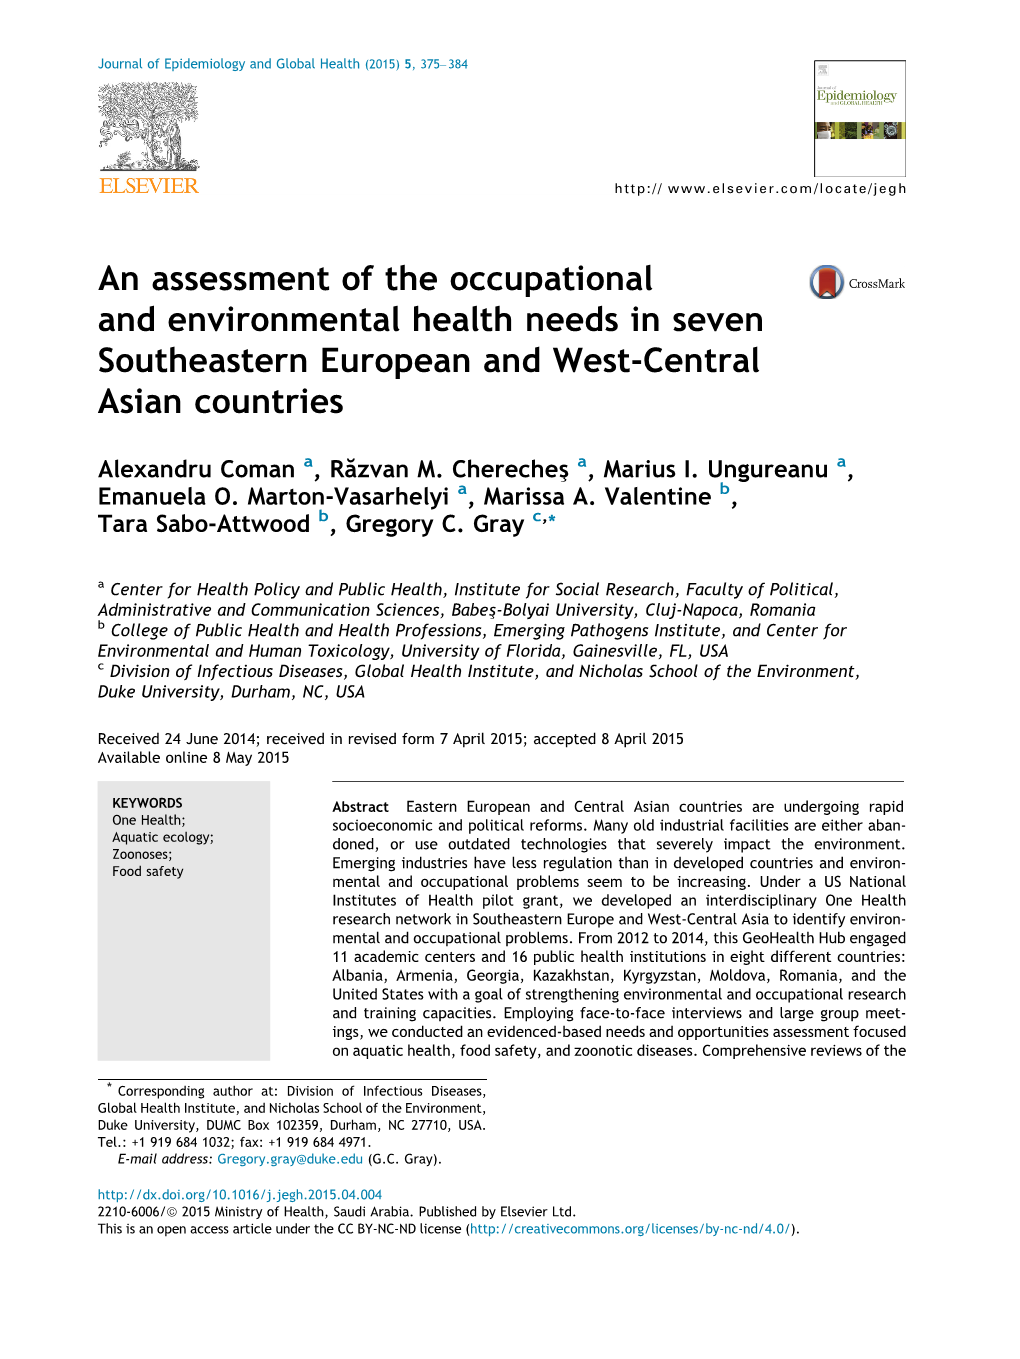 An Assessment of the Occupational and Environmental Health Needs in Seven Southeastern European and West-Central Asian Countries